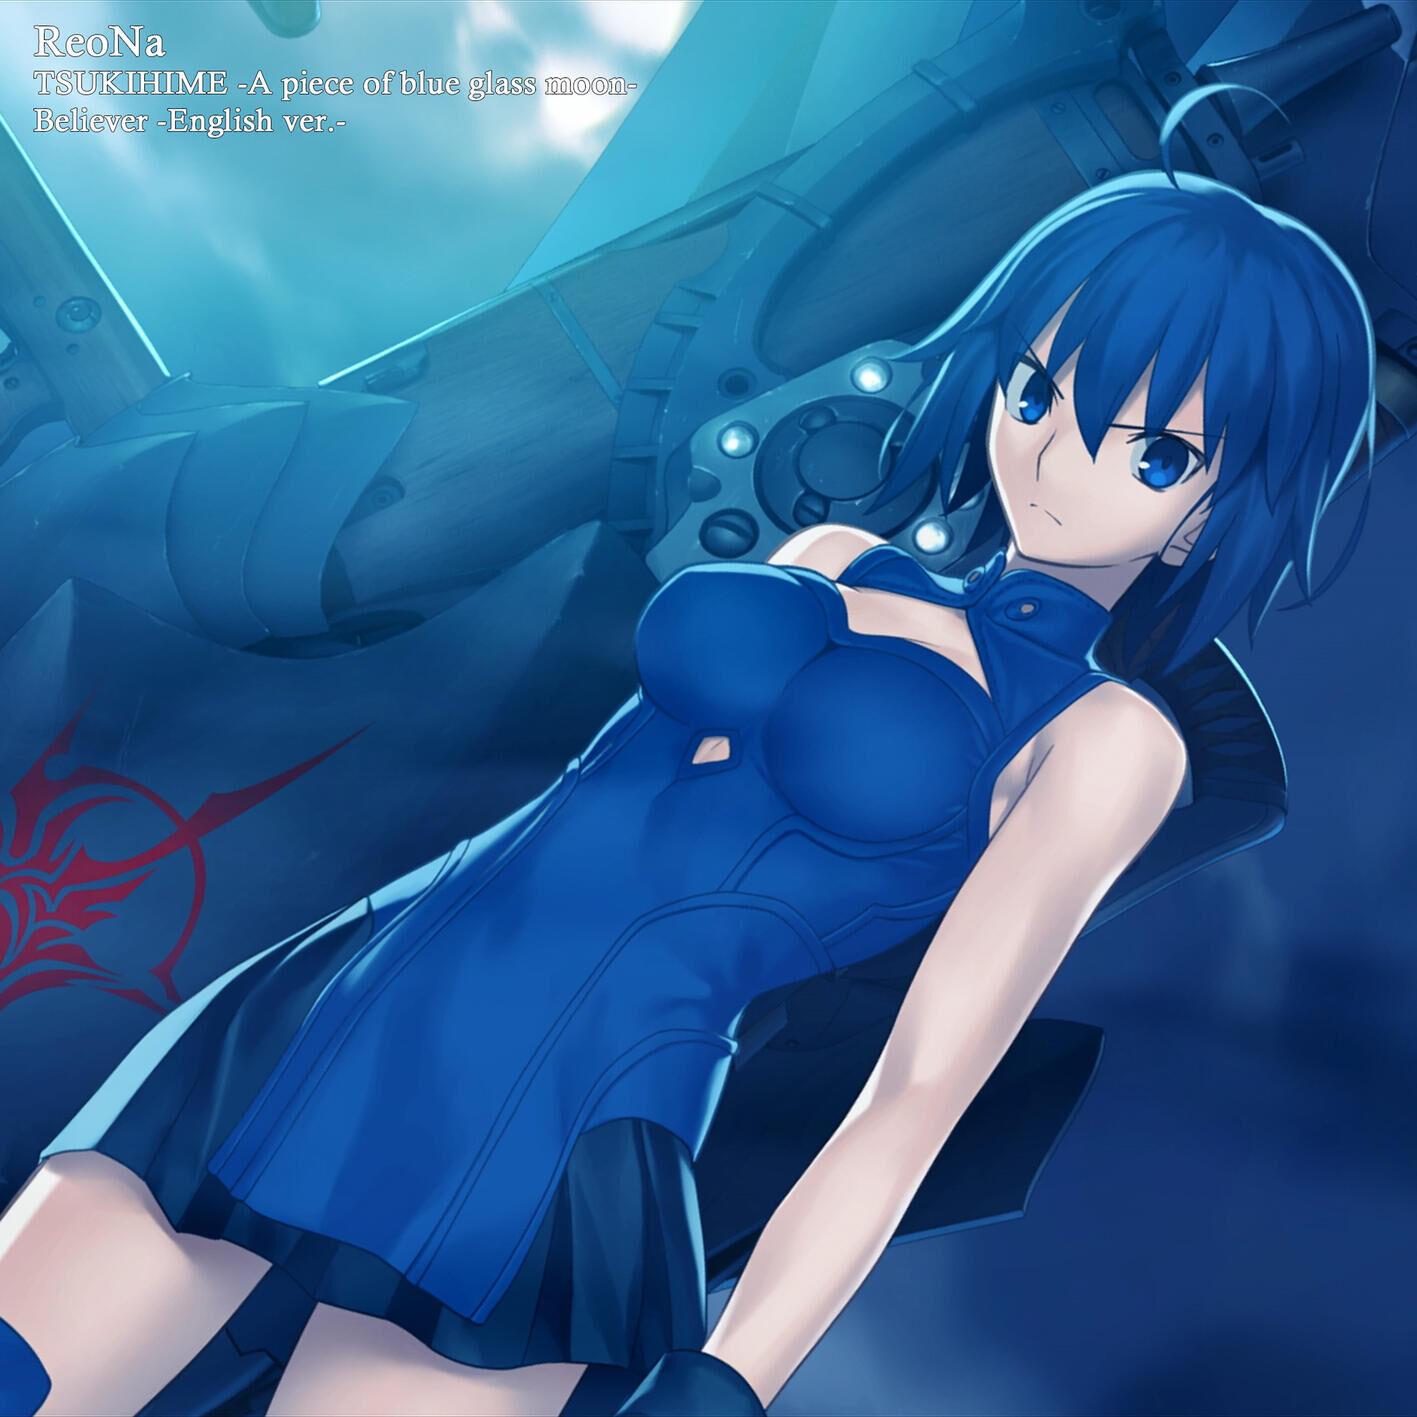 Tsukihime: A piece of blue glass moon - Believer (English ver.)